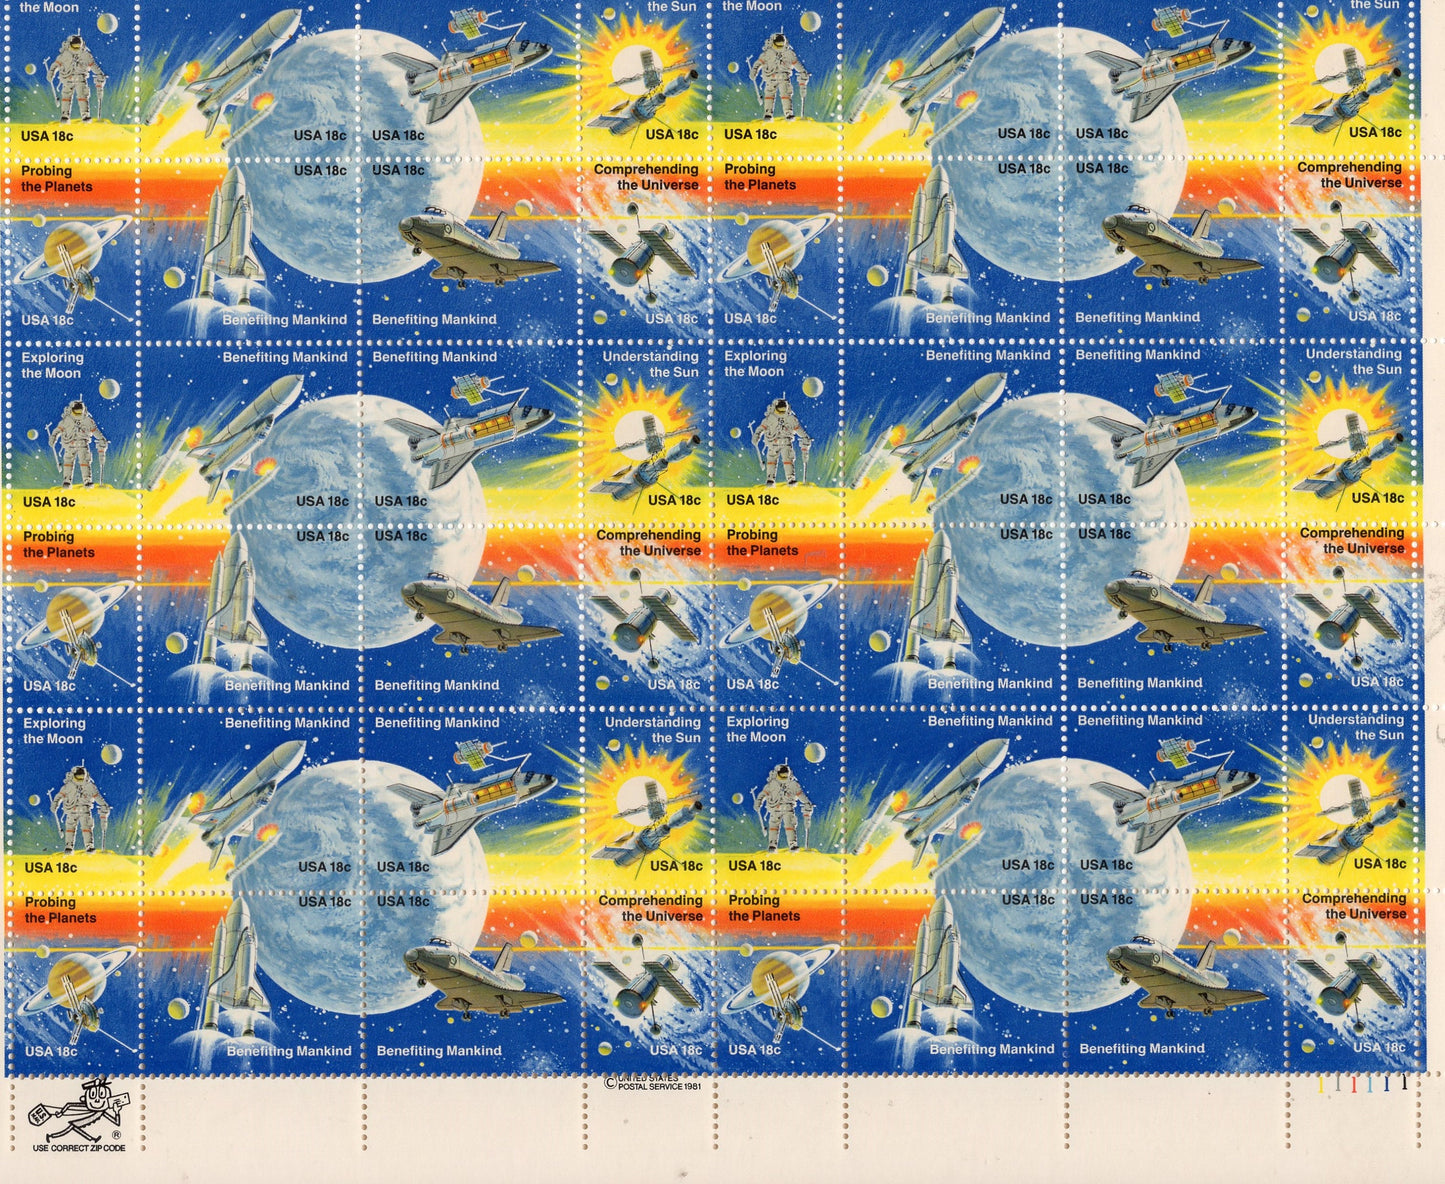 SPACE ACHIEVEMENTS Sheet of 48 Stamps Moon Walk Shuttle Skylab Moon Pioneer - Bright Fresh - Issued in 1981 - s1912 Sh -